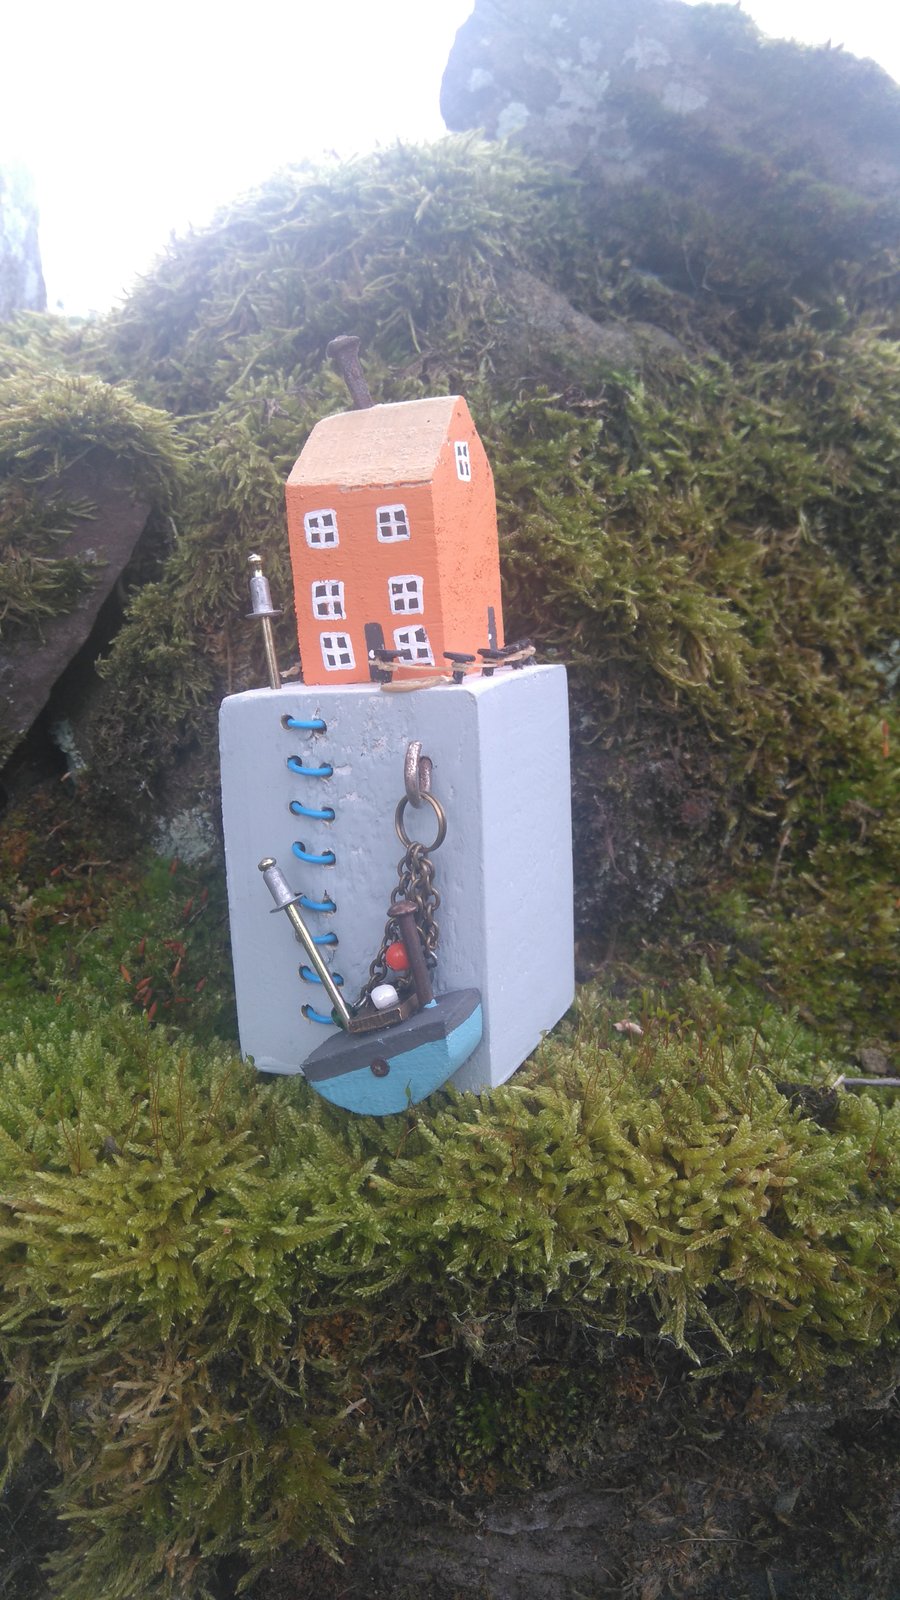 Little driftwood,scrapwood, house and harbour